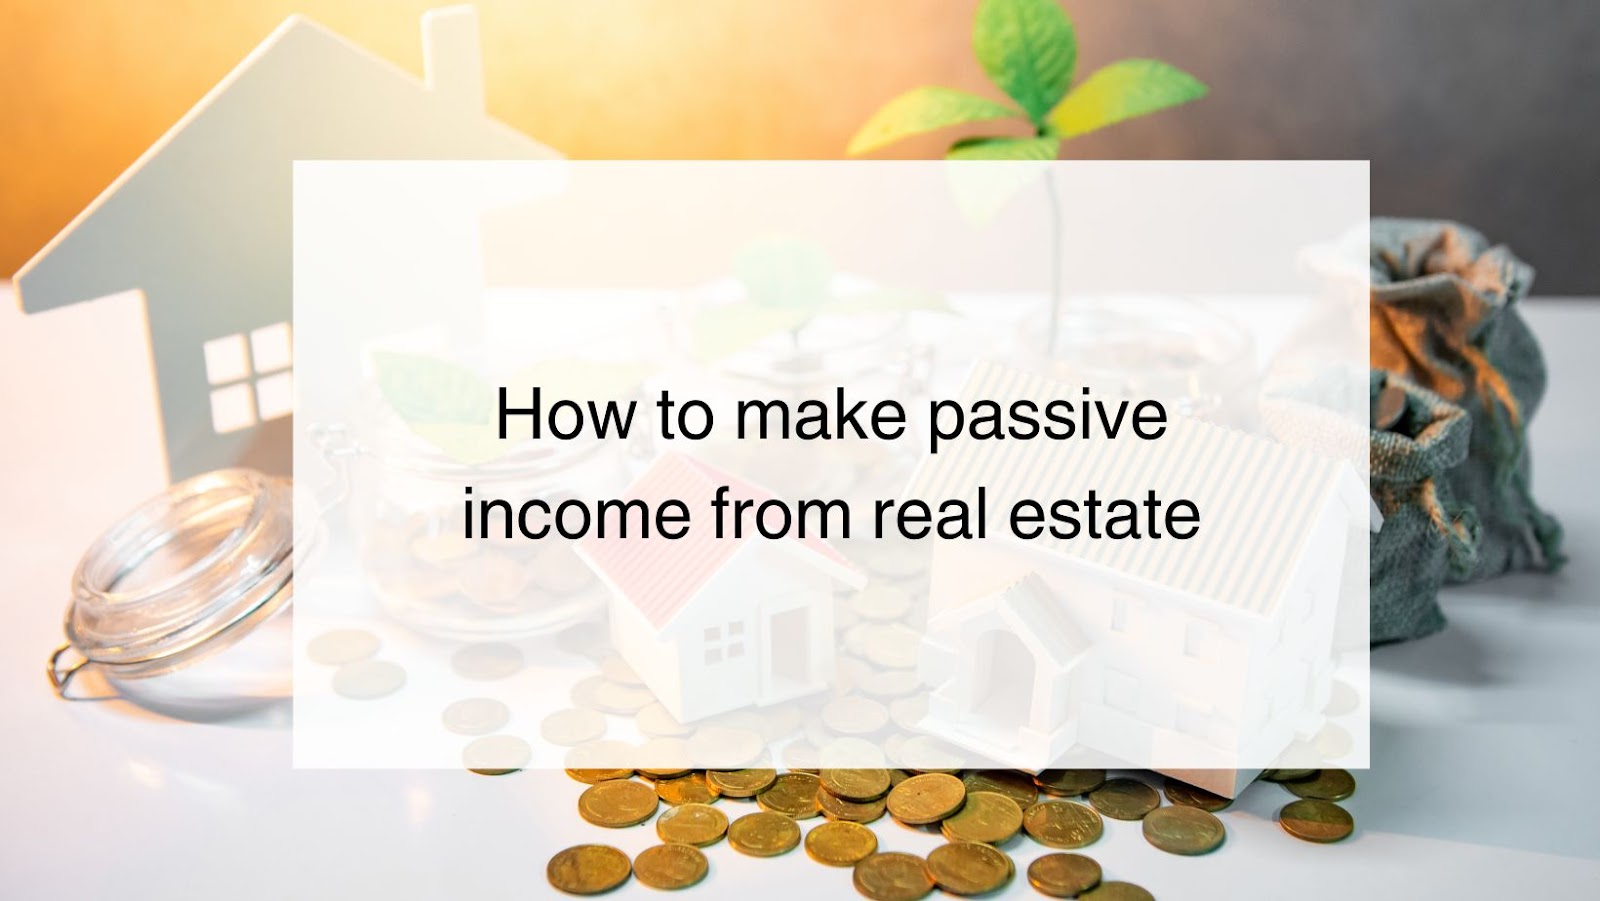 Earn Passive Income with proper research, due diligence, and a long-term investment strategy, real estate can provide a reliable source of passive income that can help you achieve your financial goals.

